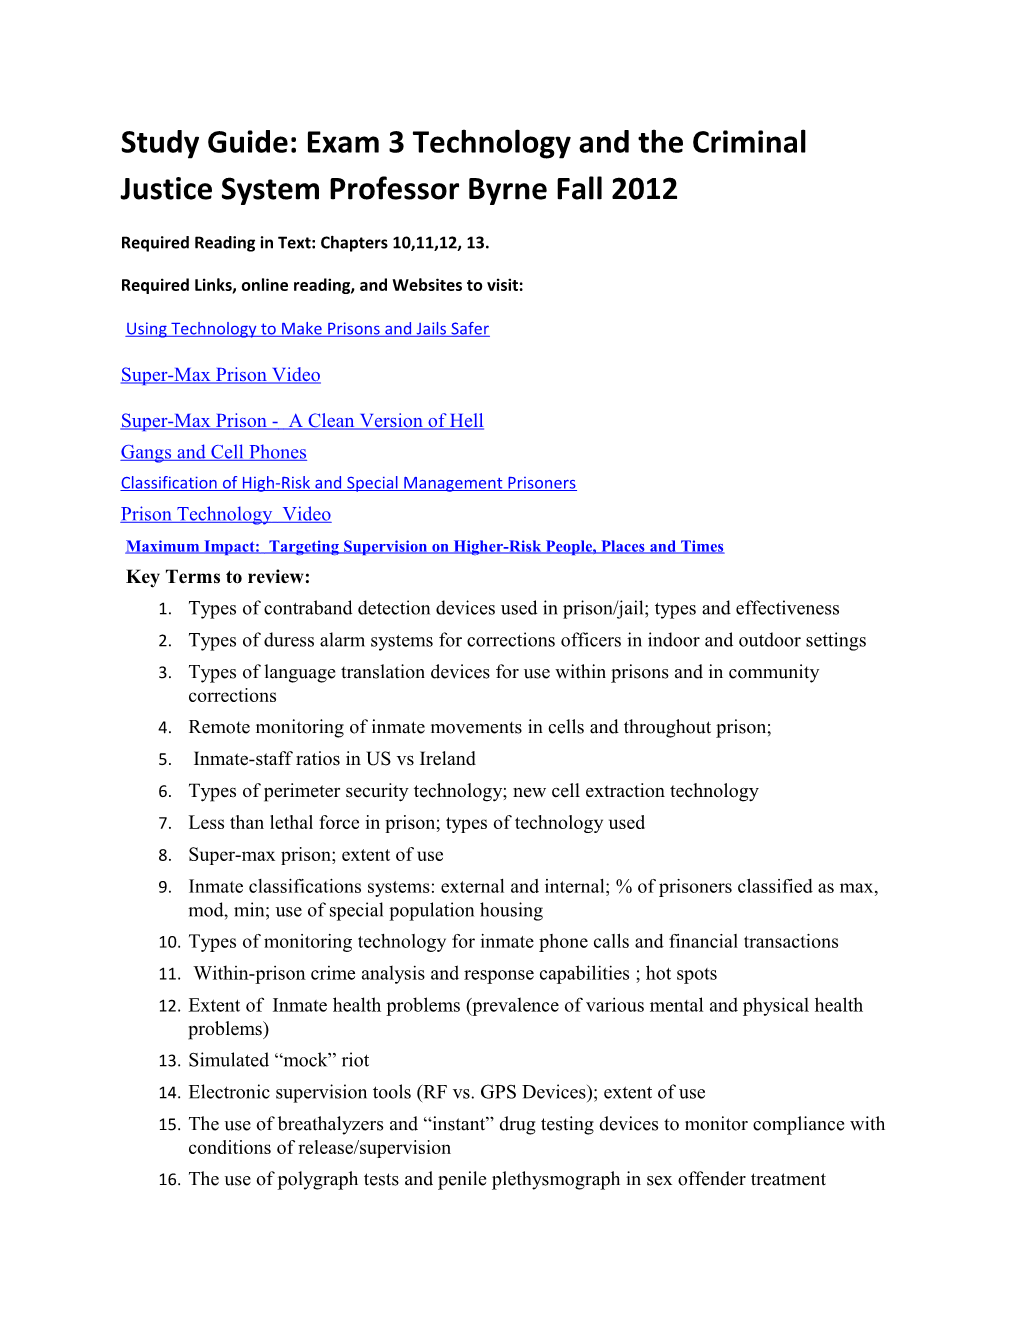 Study Guide: Exam 4 Technology and the Criminal Justice System Professor Byrne Spring 2010